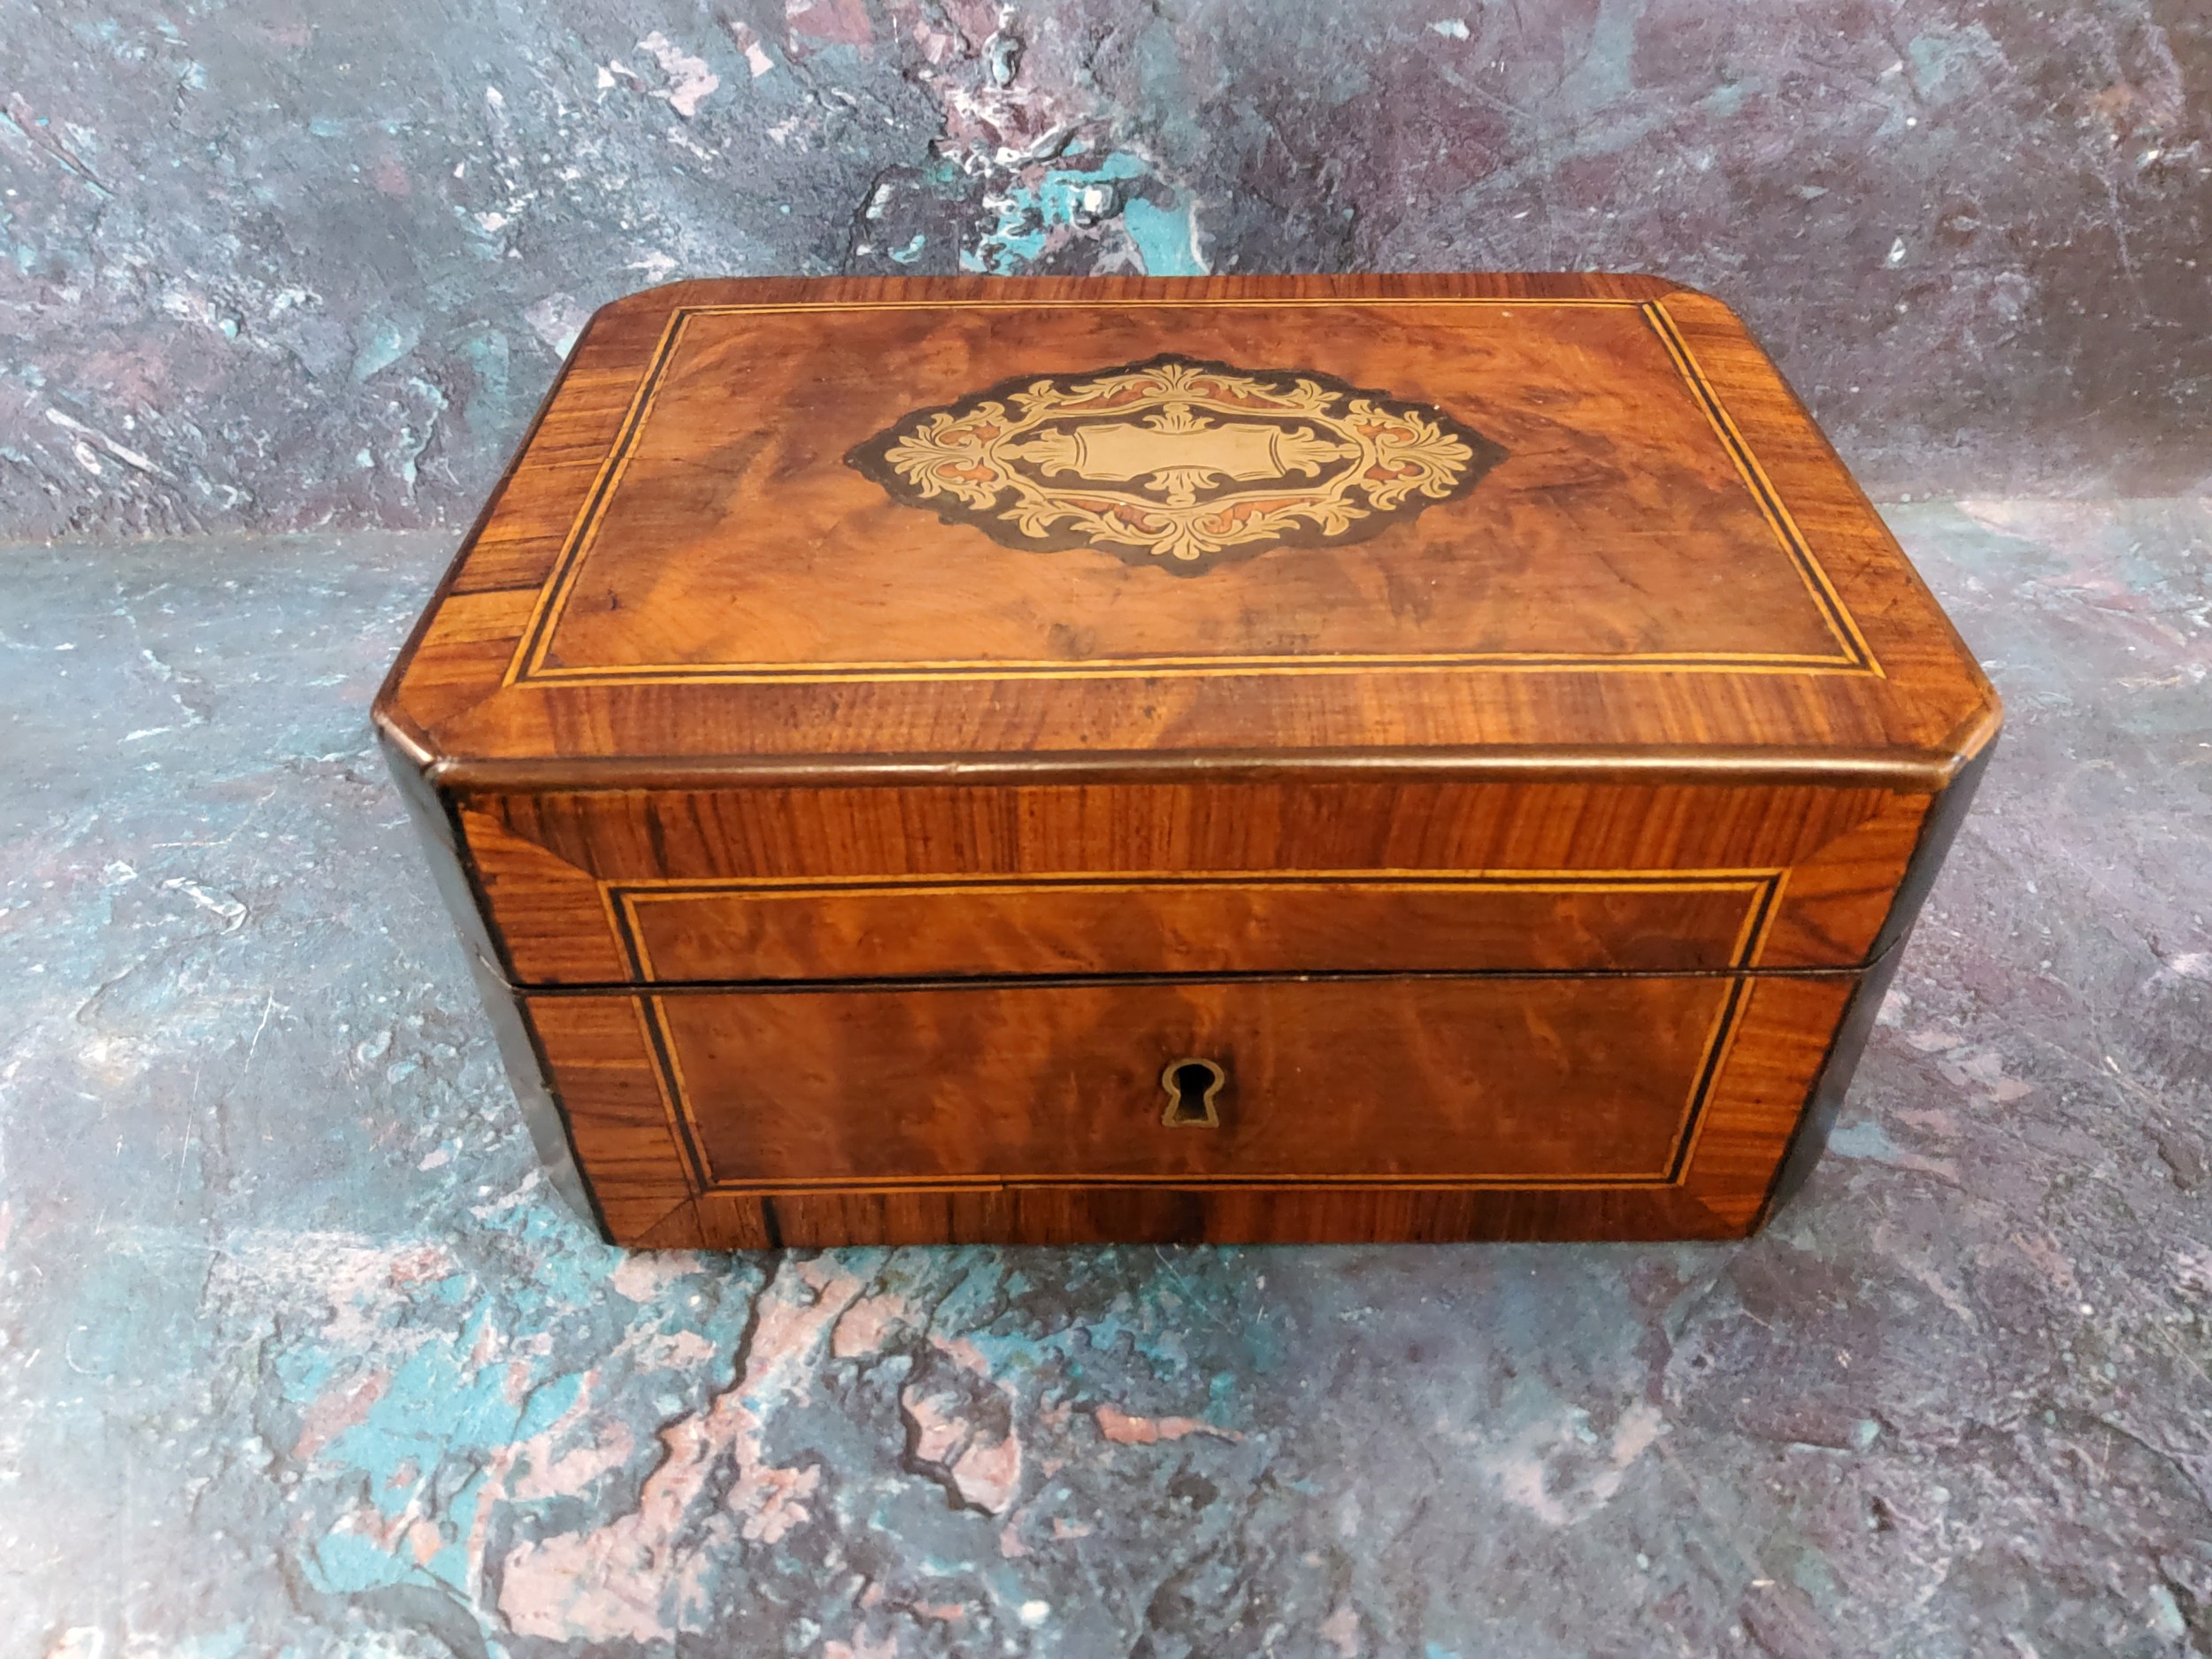 A 19th century French walnut canted rectangular jewellery box, the cover inlaid with brass